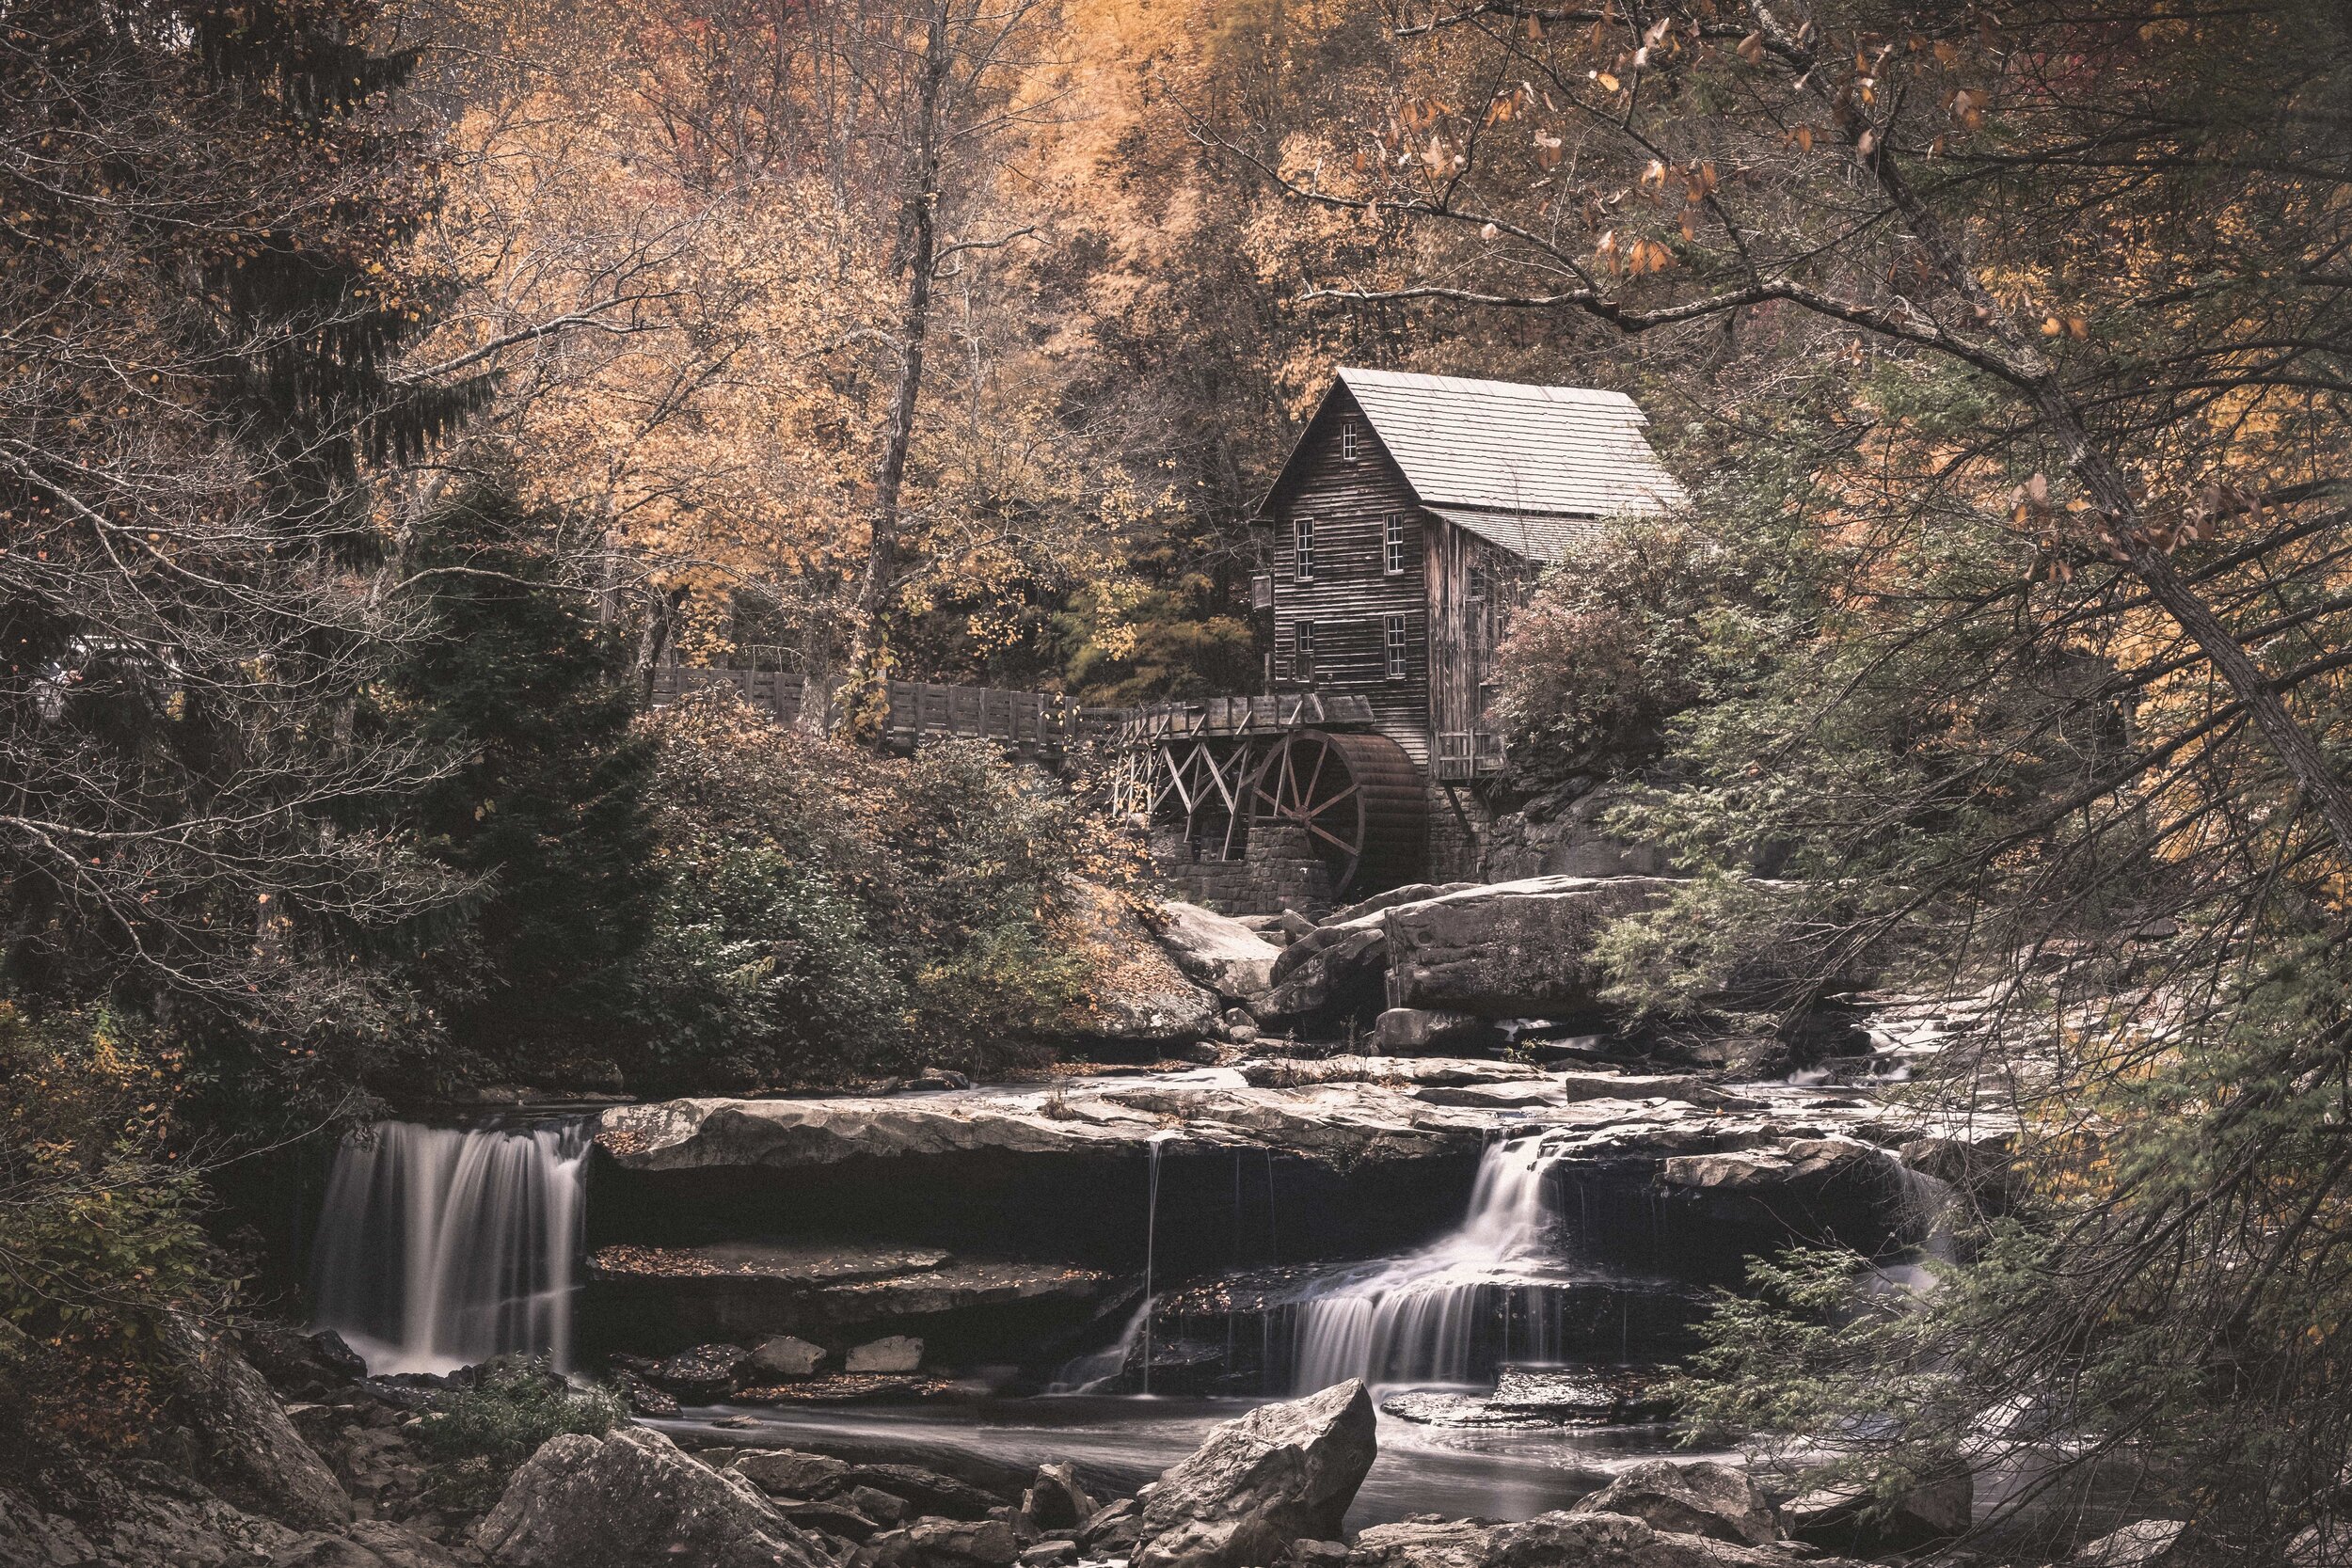 Glade Creek Grist Mill during Fall